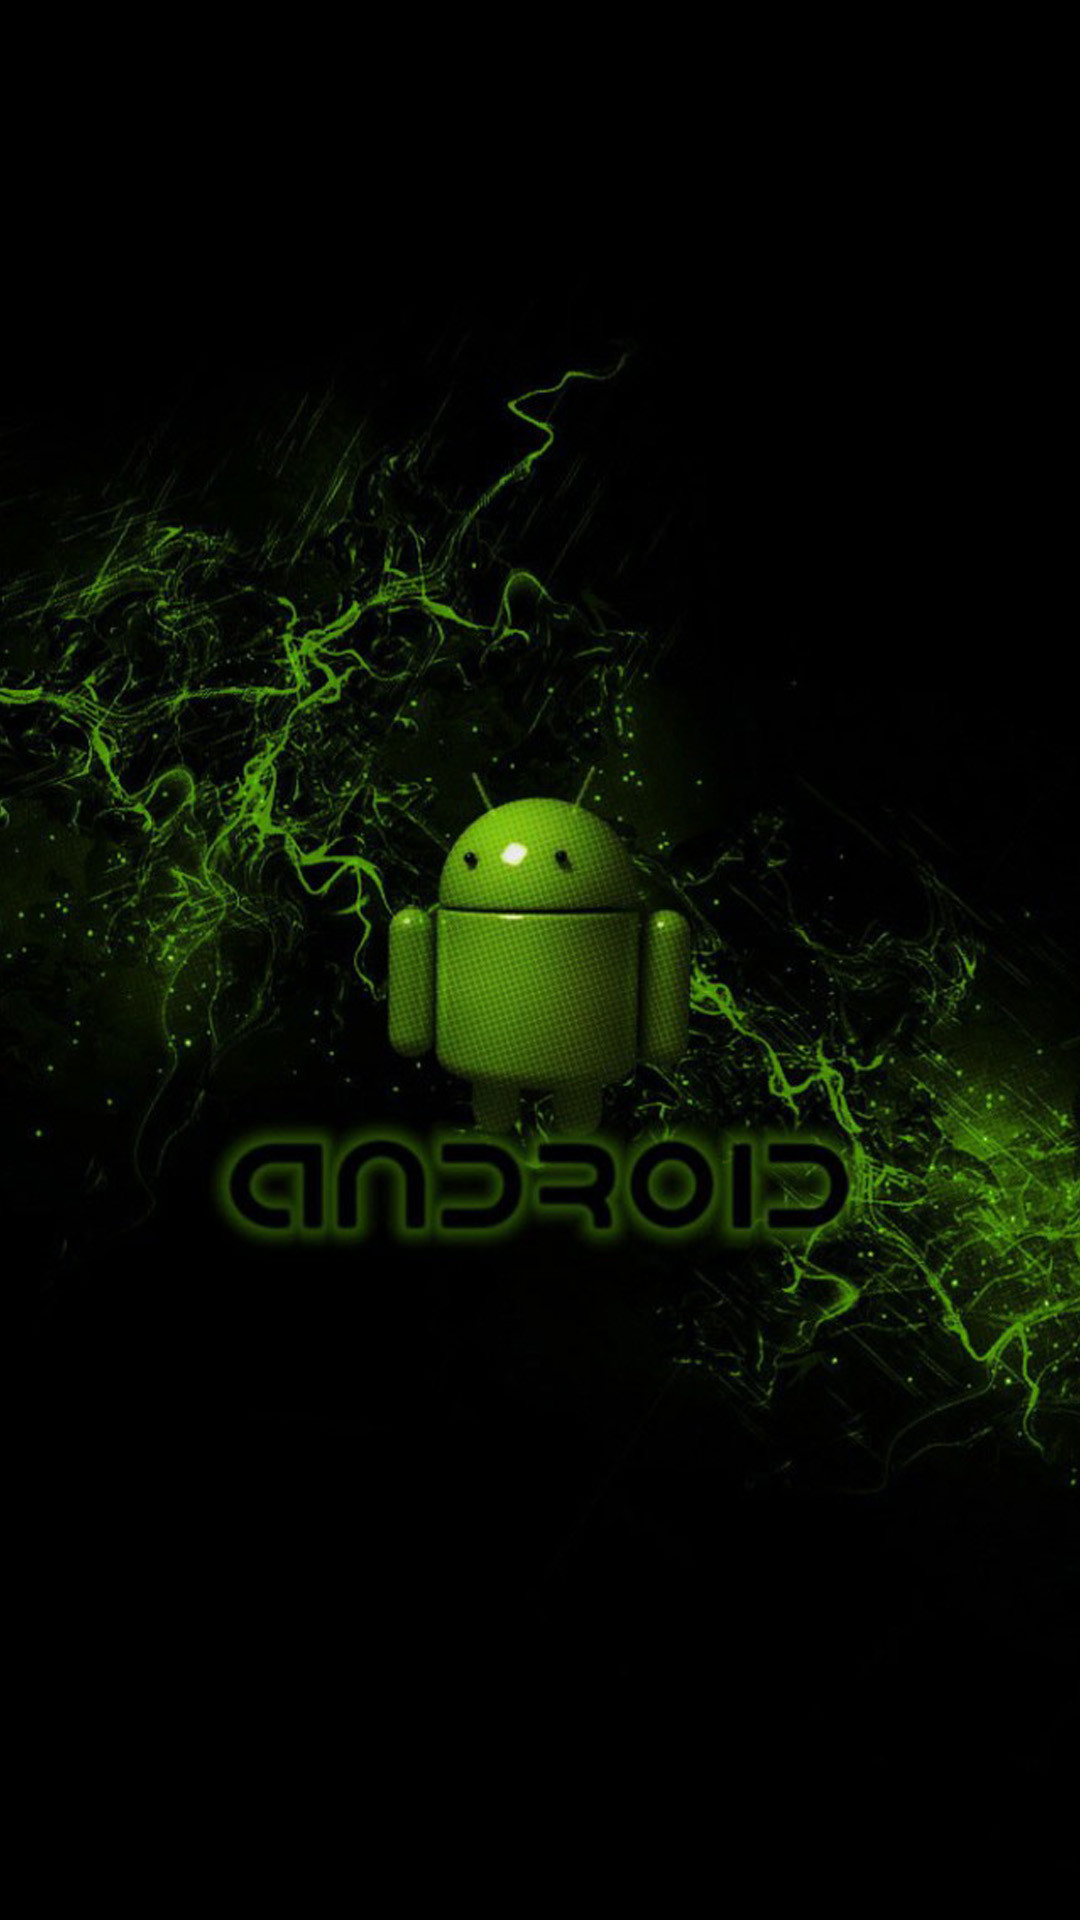 1080x1920 966. Android Green Smoke Smartphone Wallpapers HD